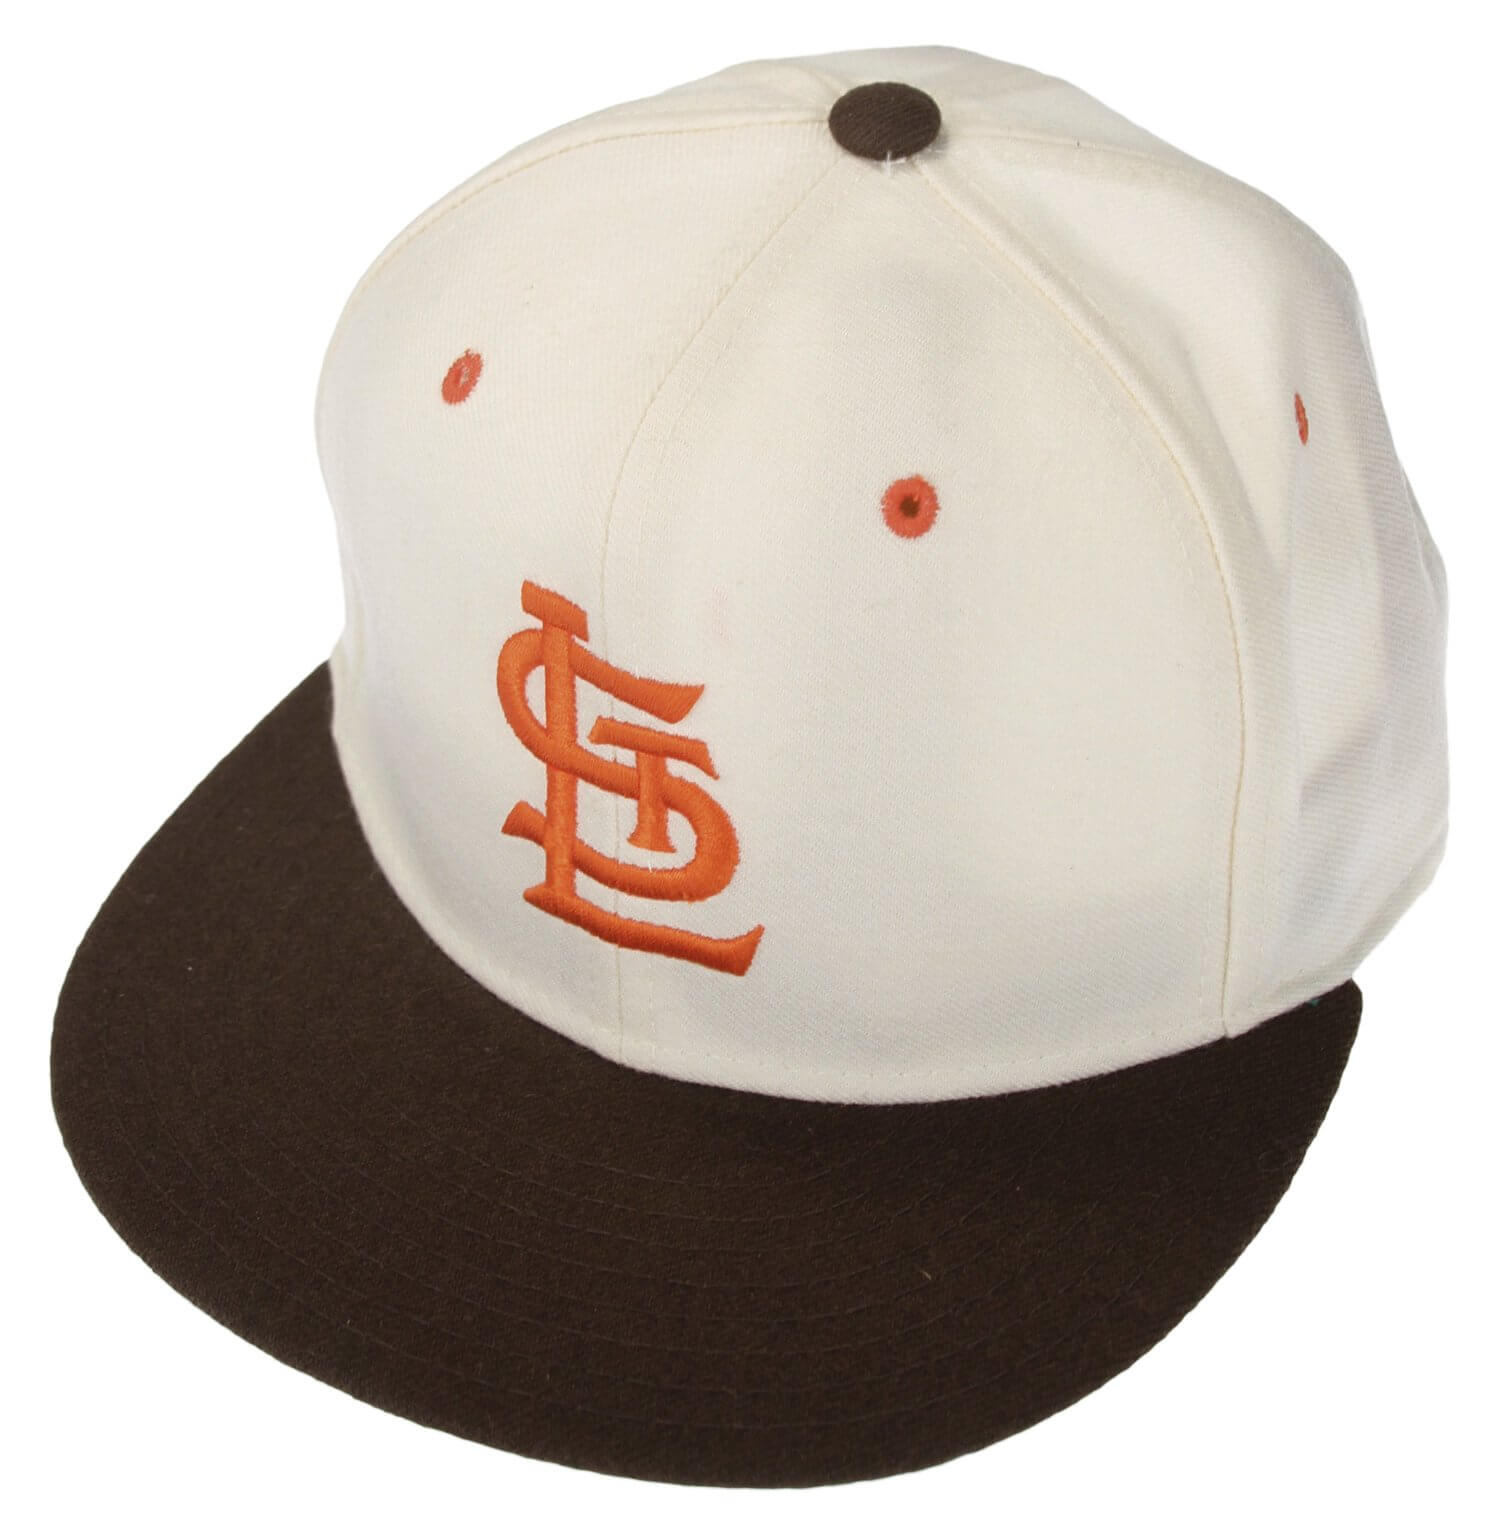 MLB Lui V Red Bottom 59Fifty Fitted Hat Collection by MLB x New